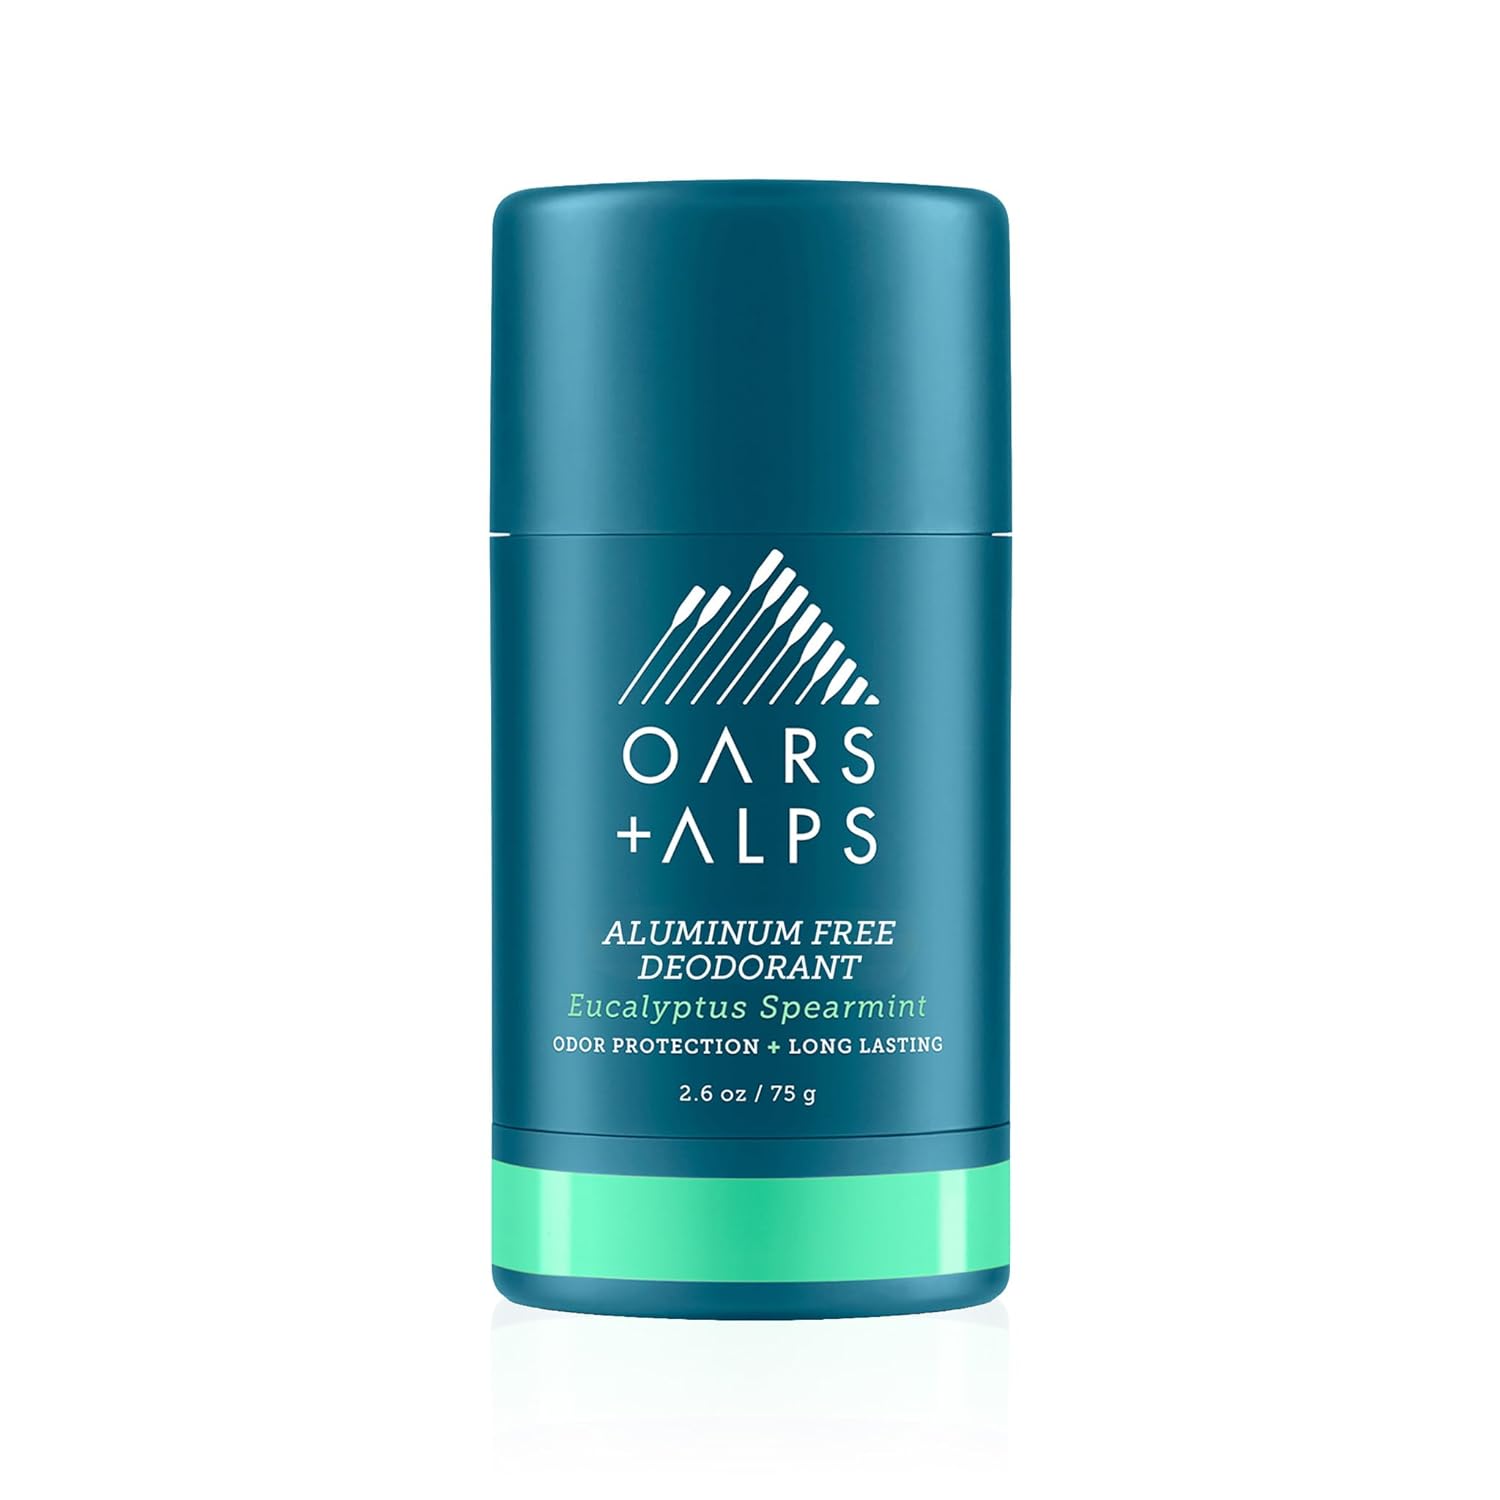 Oars + Alps Aluminum Free Deodorant for Men and Women, Dermatologist Tested and Made with Clean Ingredients, Travel Size, Eucalyptus Spearmint, 1 Pack, 2.6 Oz